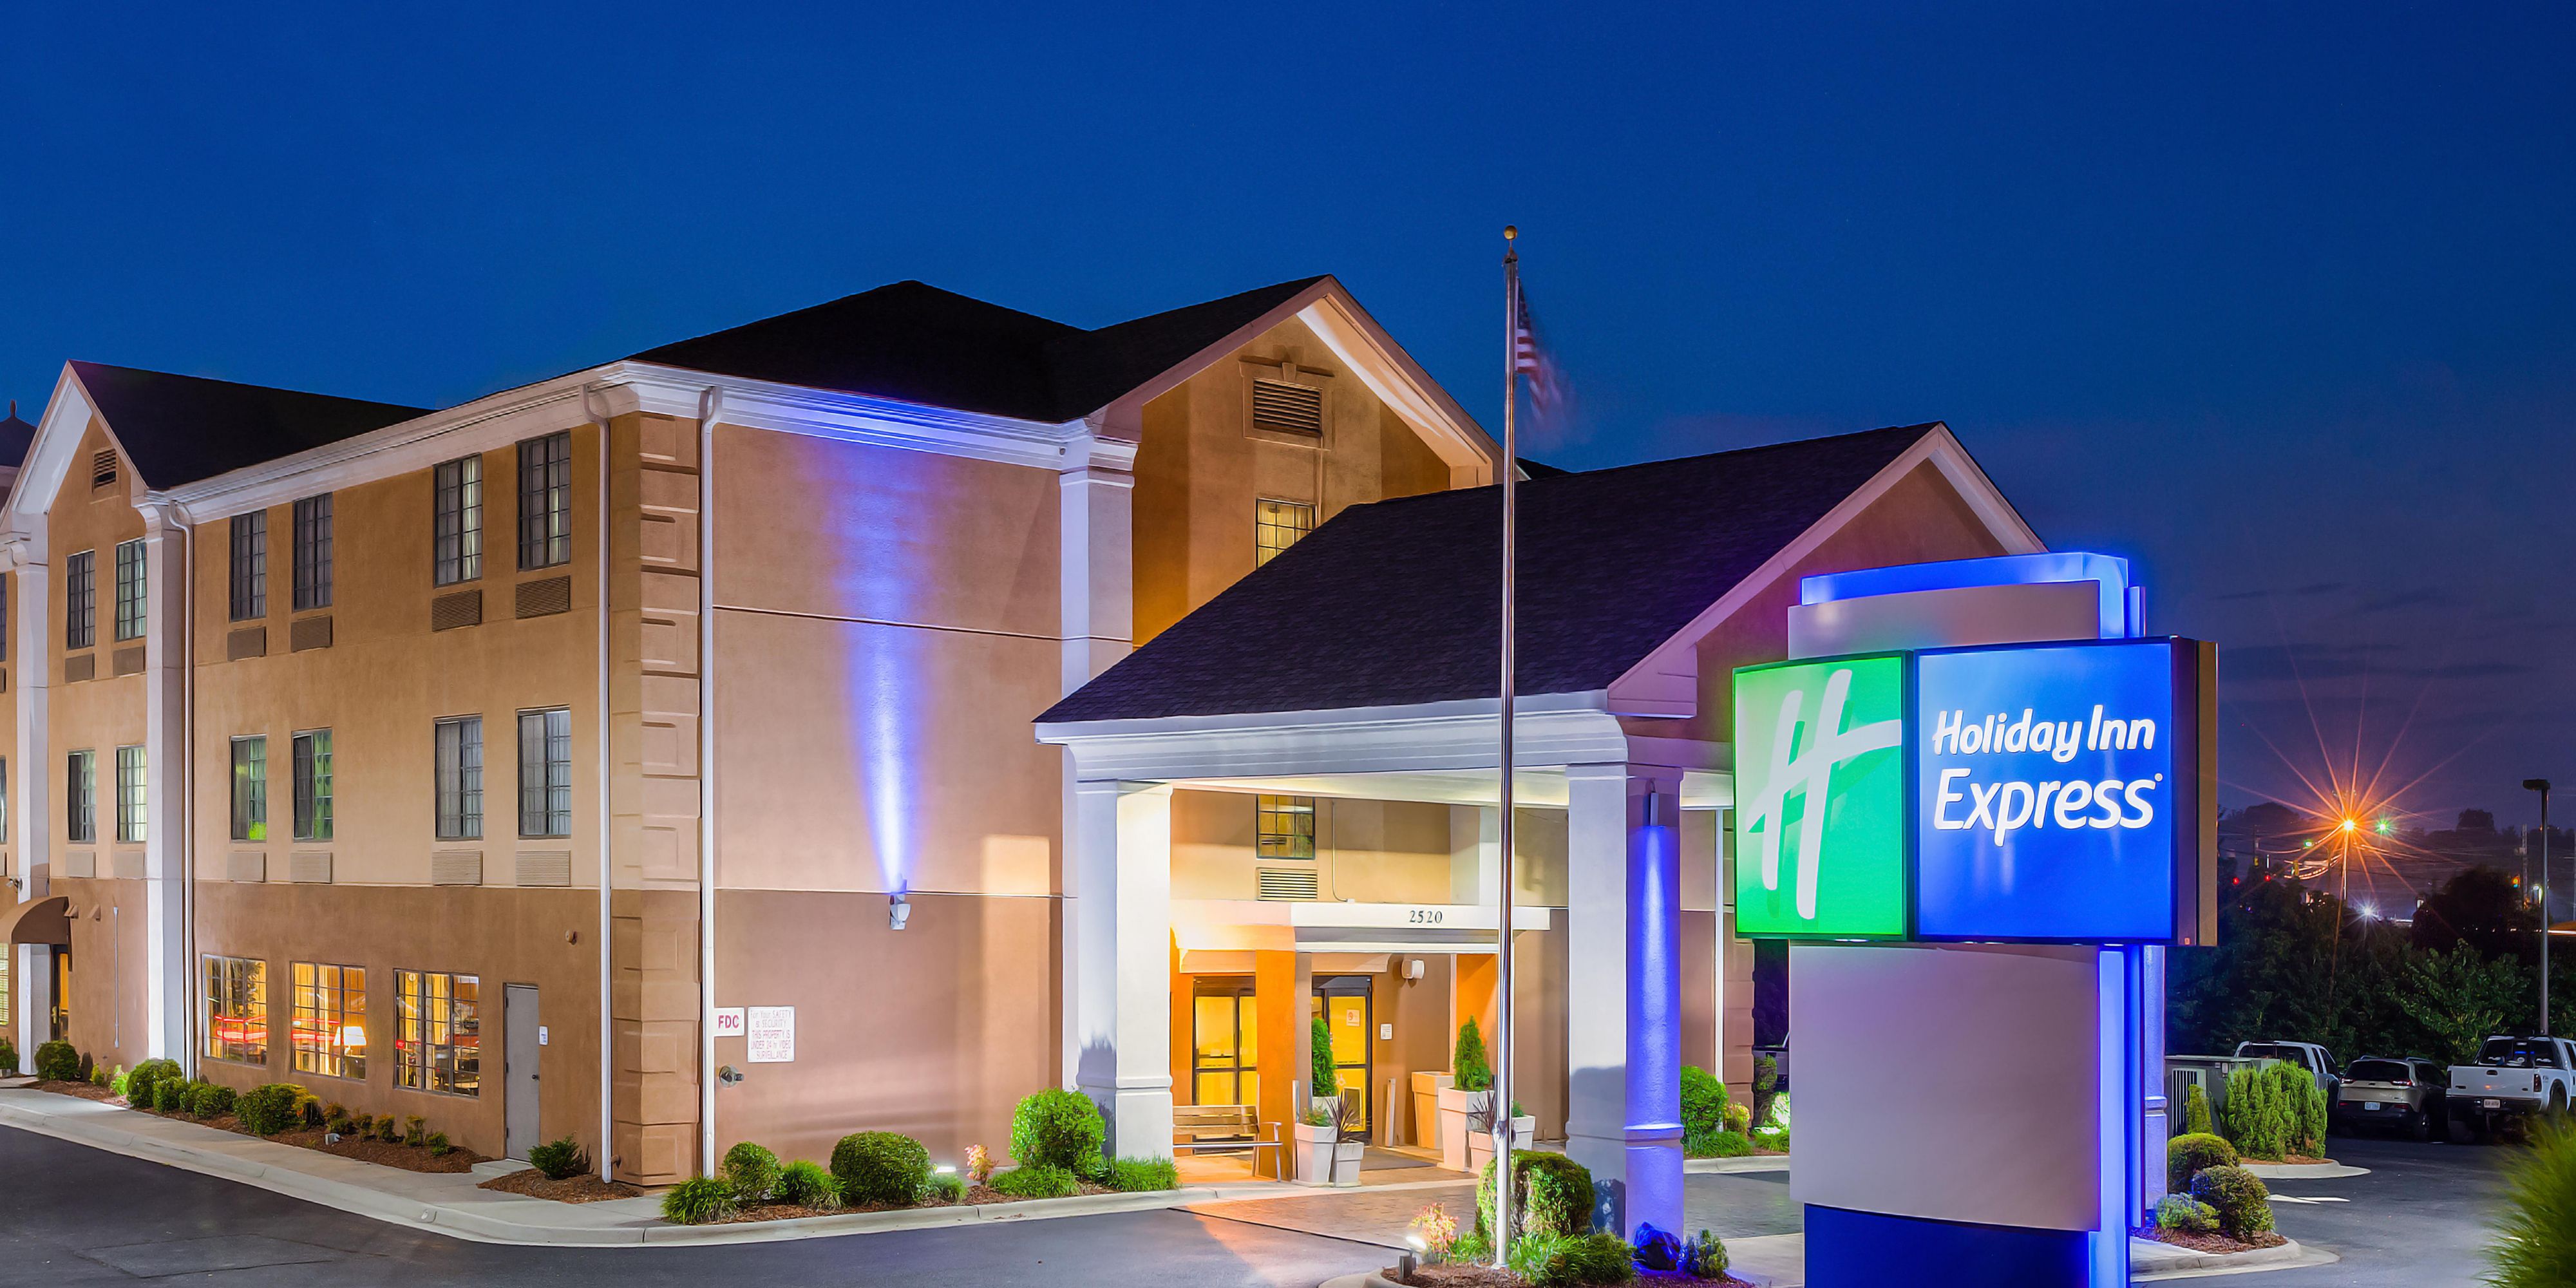 While you are in town visiting Winston-Salem State University, stay with us at the Holiday Inn Express! We are just 15 minutes away from campus and we offer a special discount rate. Offer not valid on homecoming weekend or graduation weekends.